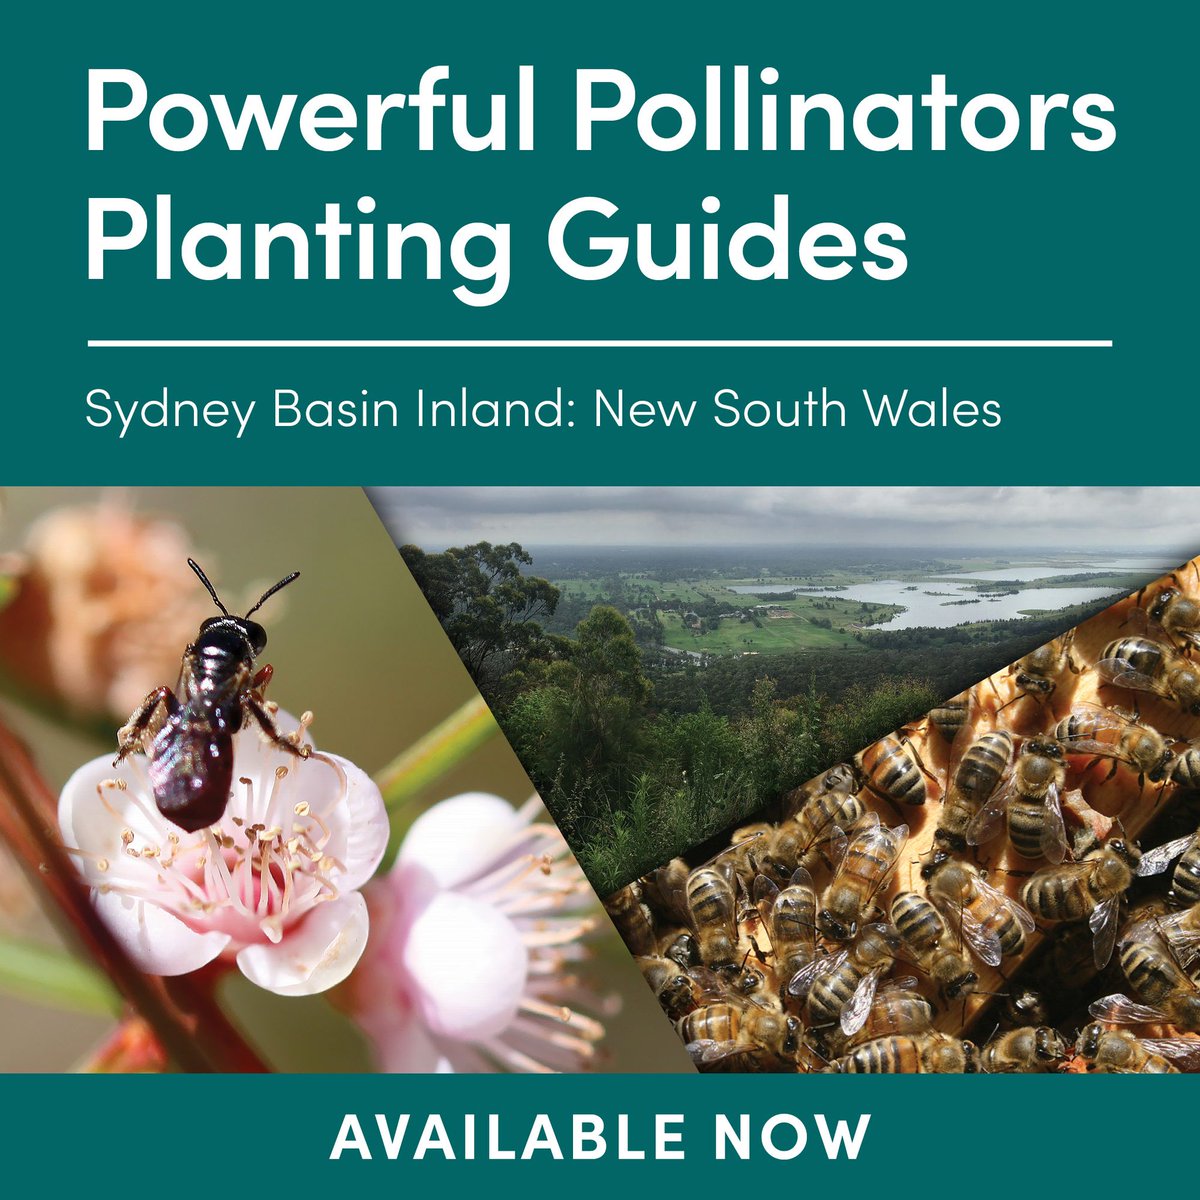 A Powerful Pollinators Planting Guide is available for residents of the Sydney Basin Inland region. The guide contains a list of plants indigenous to the region to help gardeners select plants that provide food for pollinators. Download the guide at bit.ly/3WRf8jN